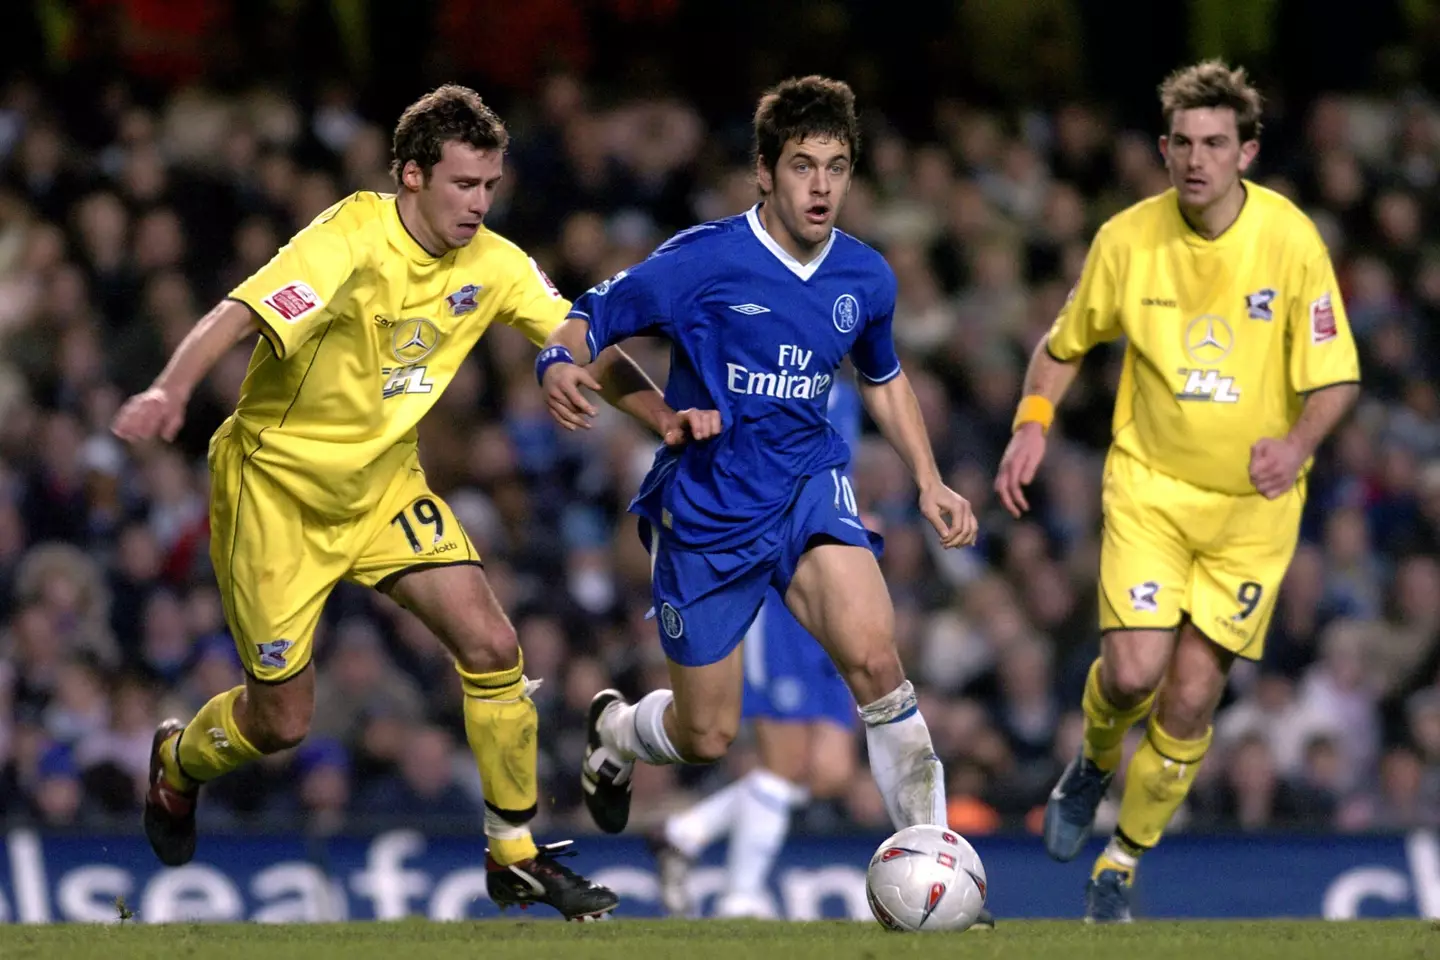 Joe Cole during a 2005 FA Cup match between Chelsea and Scunthorpe United.